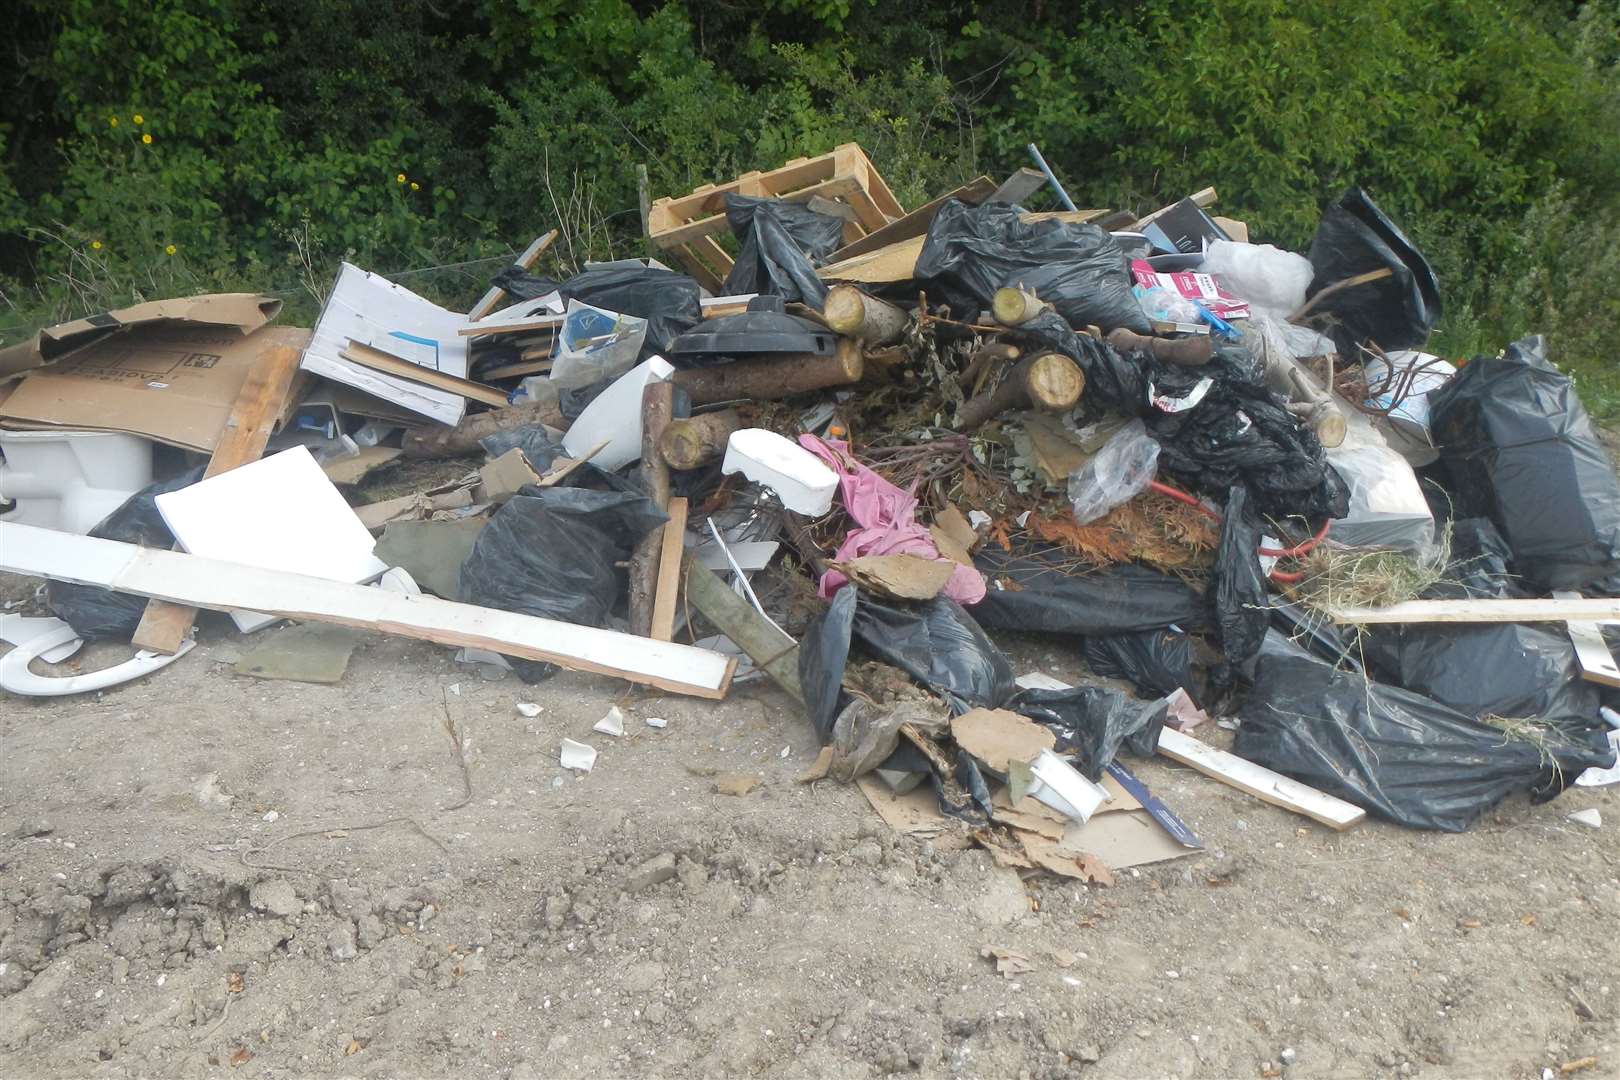 One example of Rodney Matthews' fly tipping, off Shelvin Farm Road in Wooton